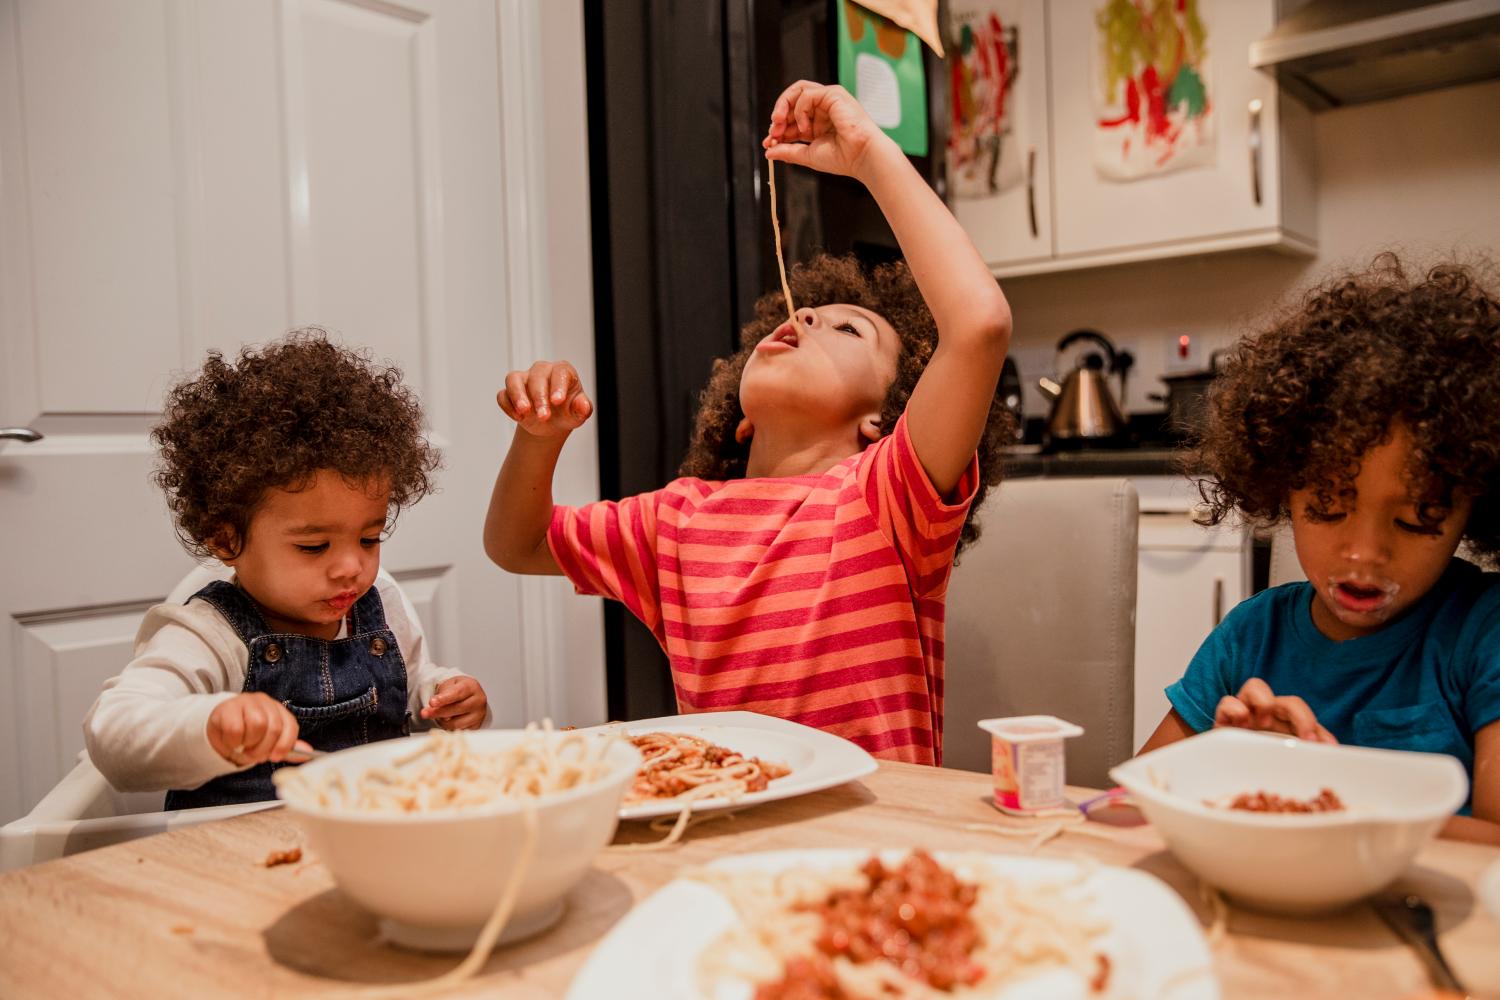 A family around a table eating spaghetti one child dangles spaghetti into his mouth